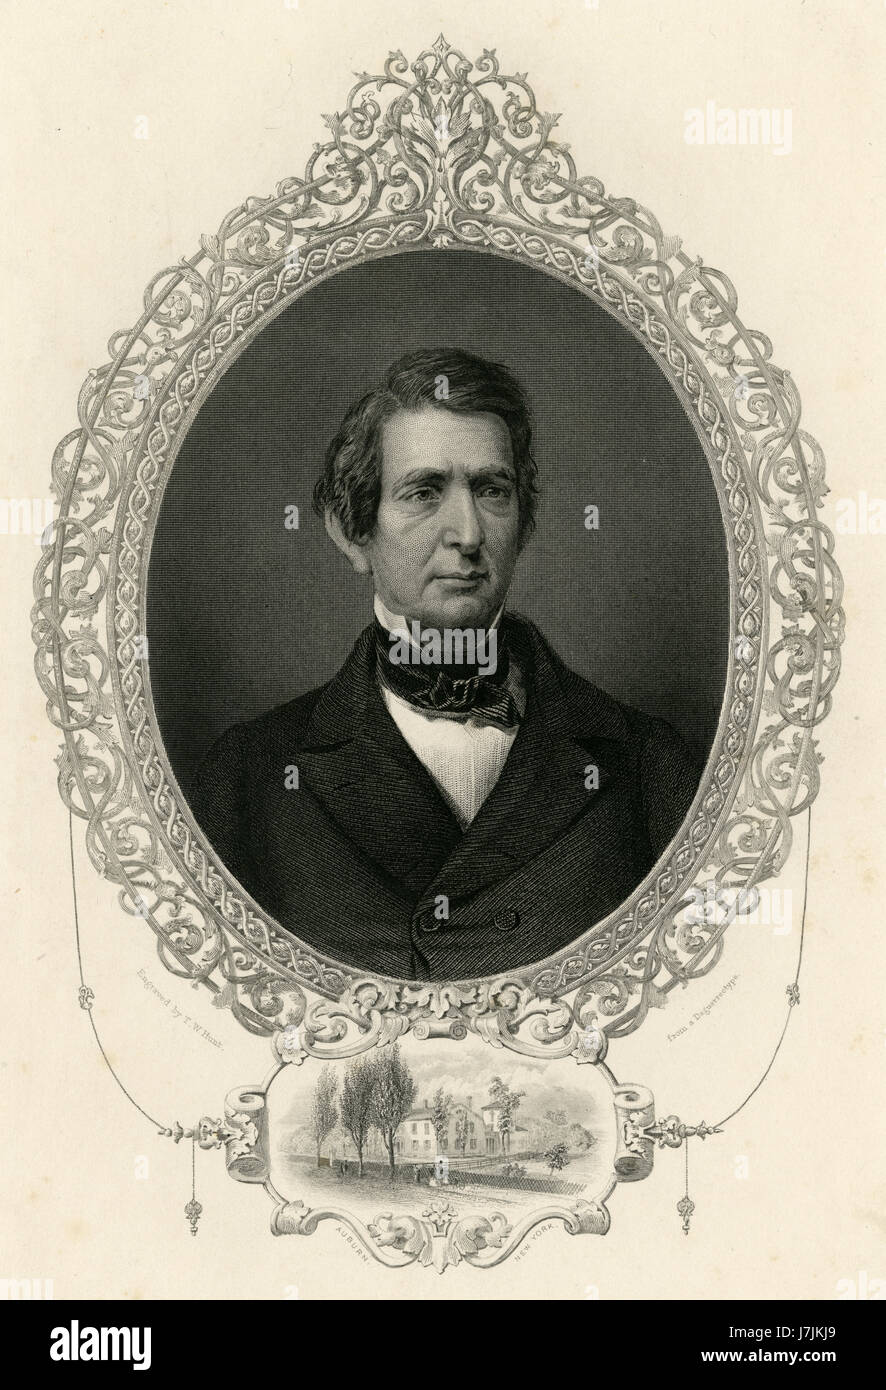 Antique c1860 engraving, William H. Seward. William Henry Seward (1801-1872) was United States Secretary of State from 1861 to 1869, and earlier served as Governor of New York and United States Senator. SOURCE: ORIGINAL ENGRAVING. Stock Photo